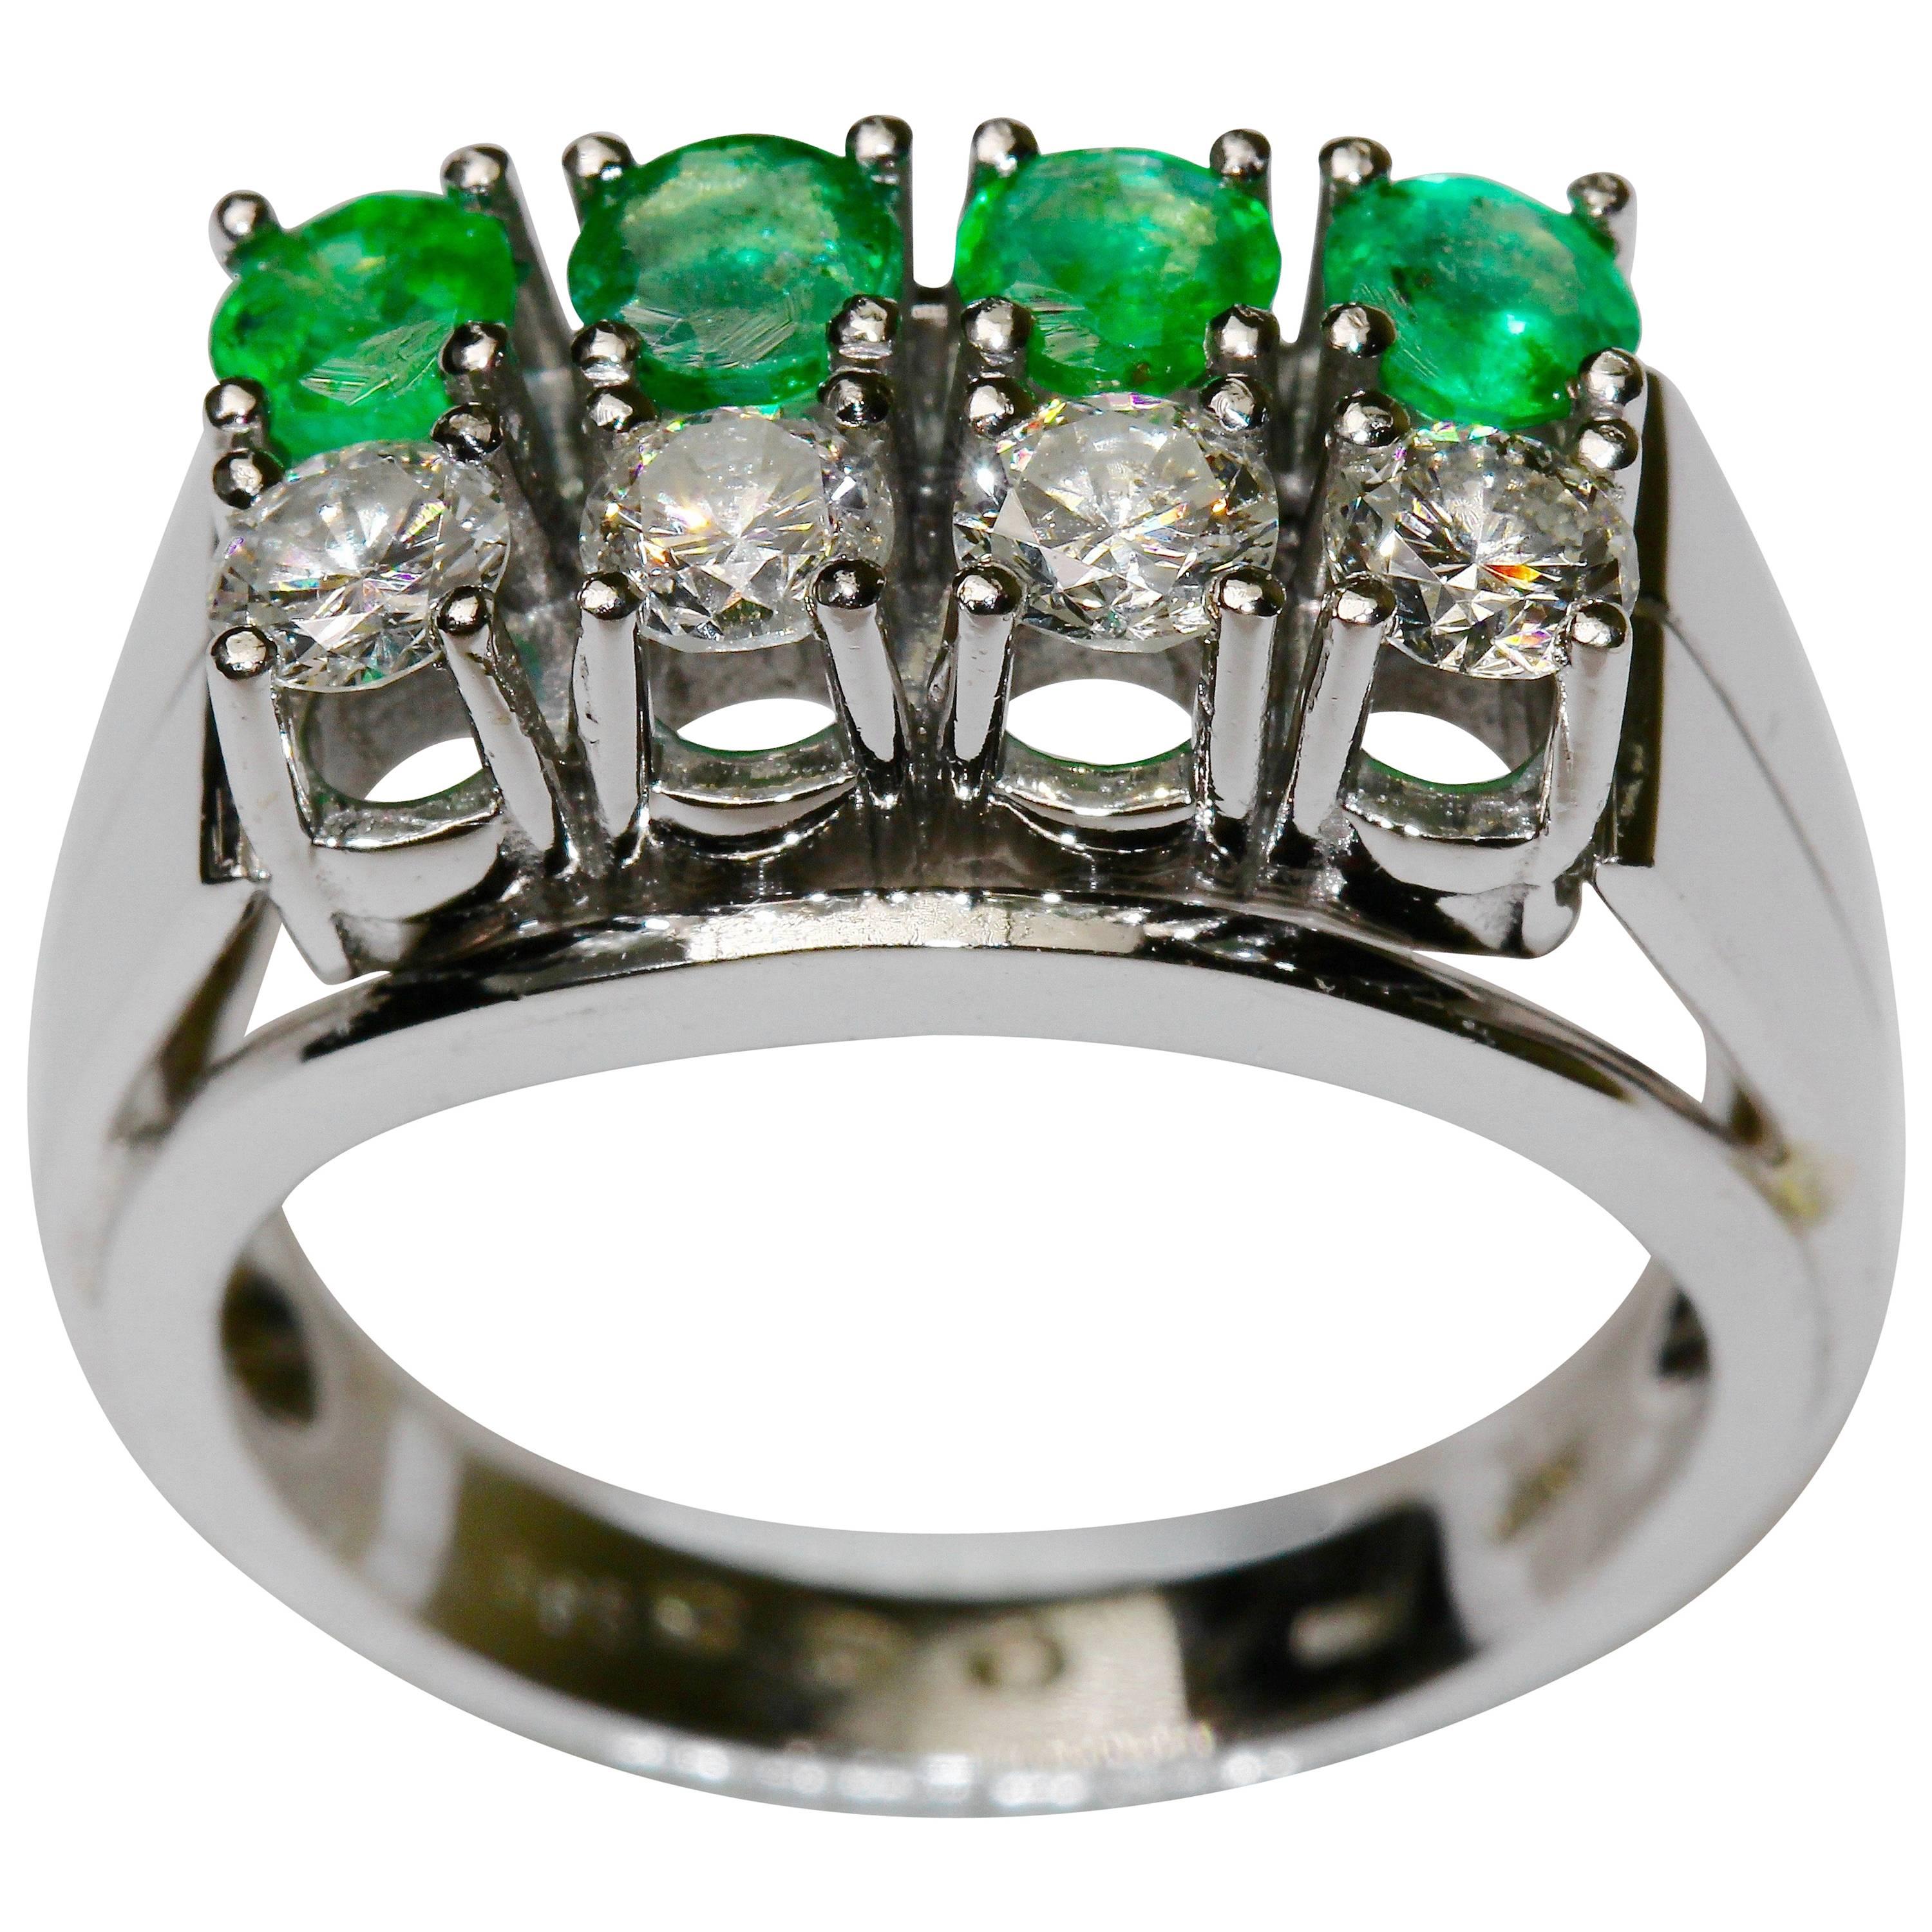 14K white gold ring with round diamonds and emeralds